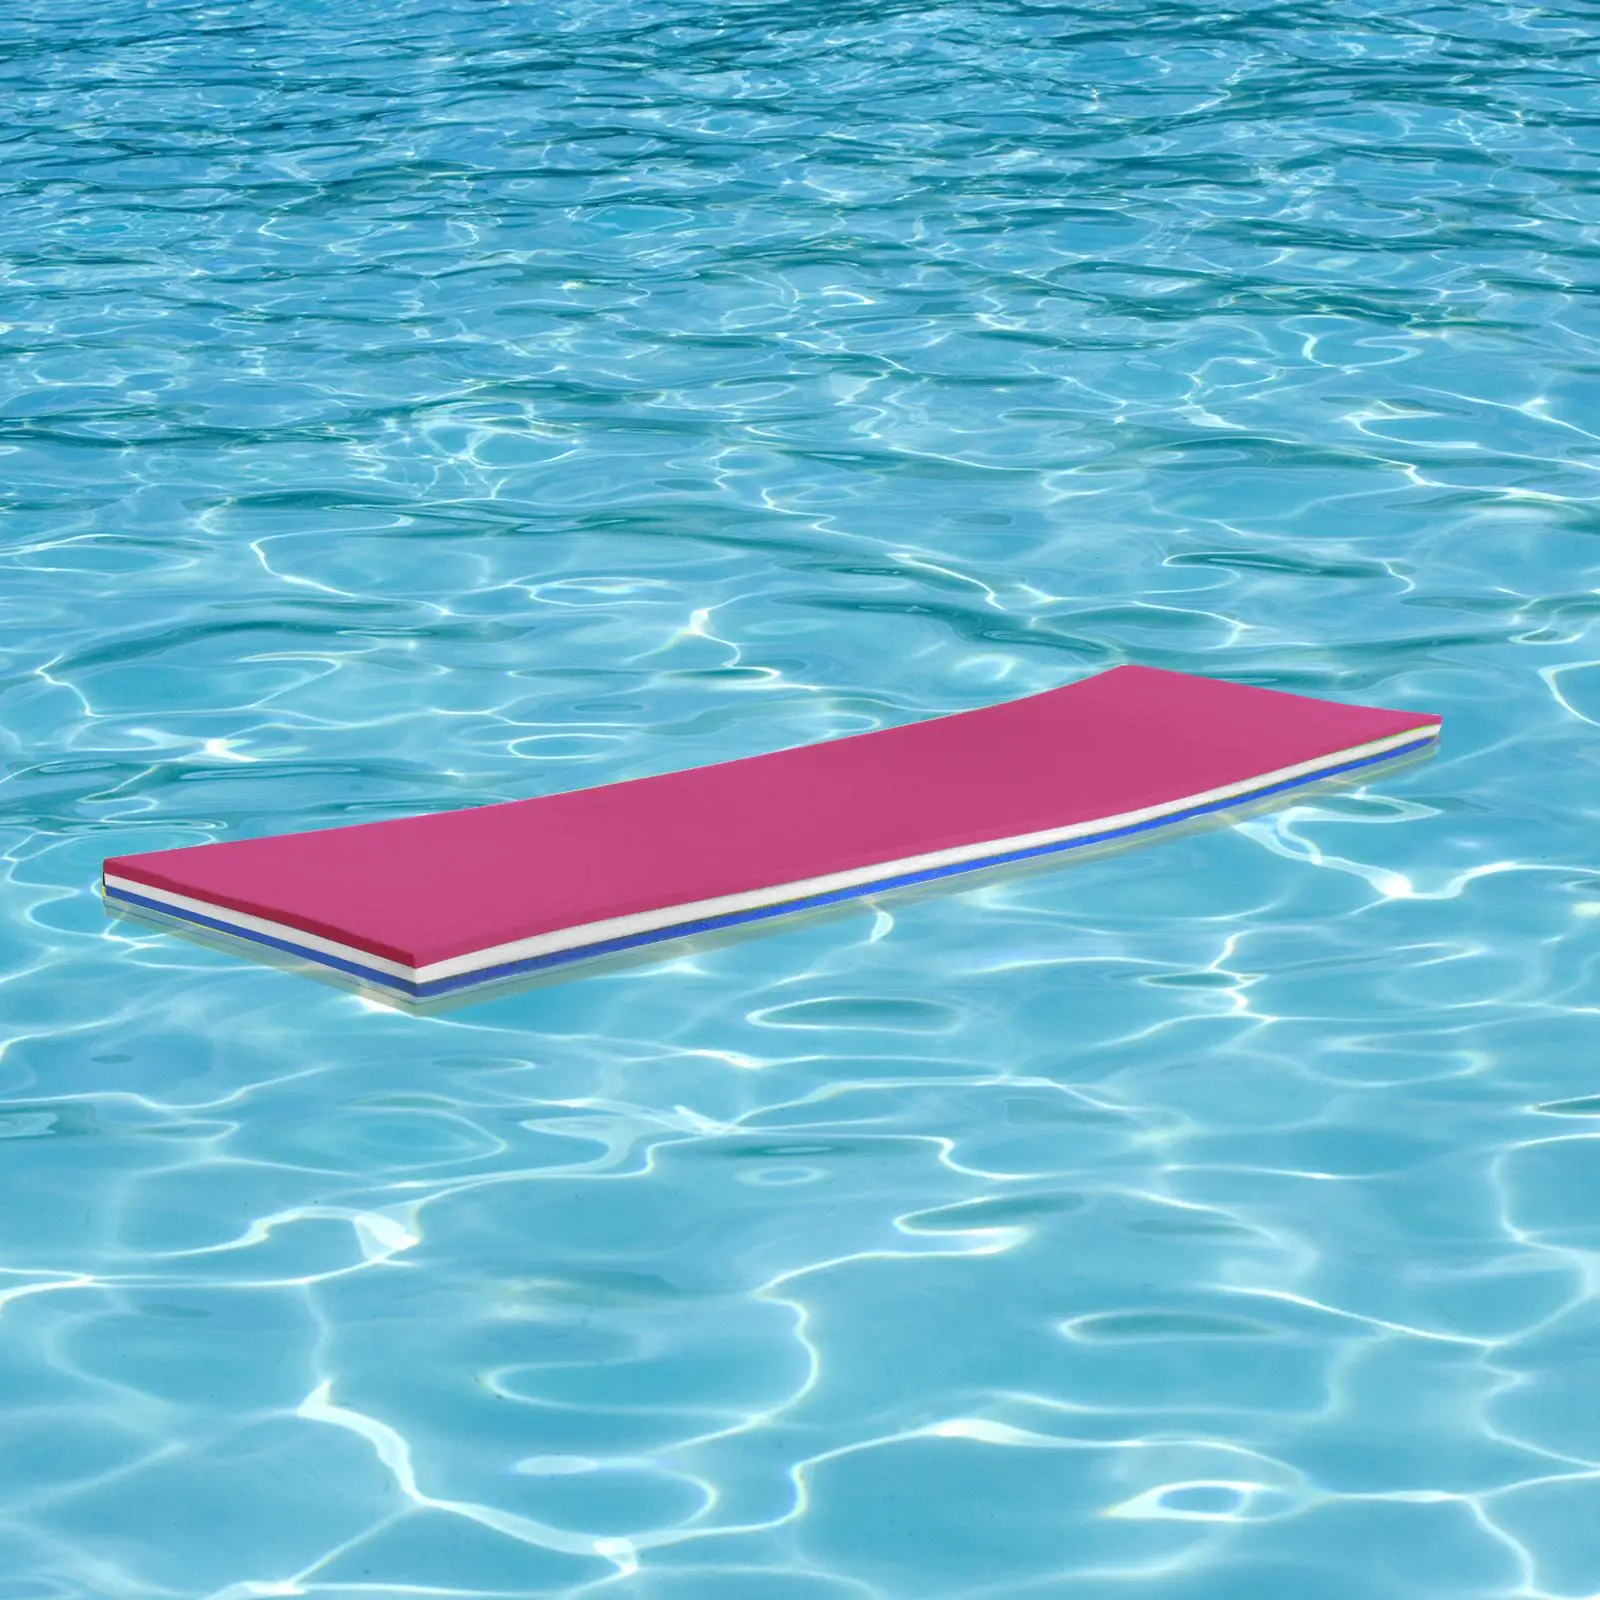 Floating Mat Pad Cushion 3 Layer 43x15.7x1.3Inches Tear Resistant Lightweight Portable for Relaxing Water Bed Xpe Foam Mat